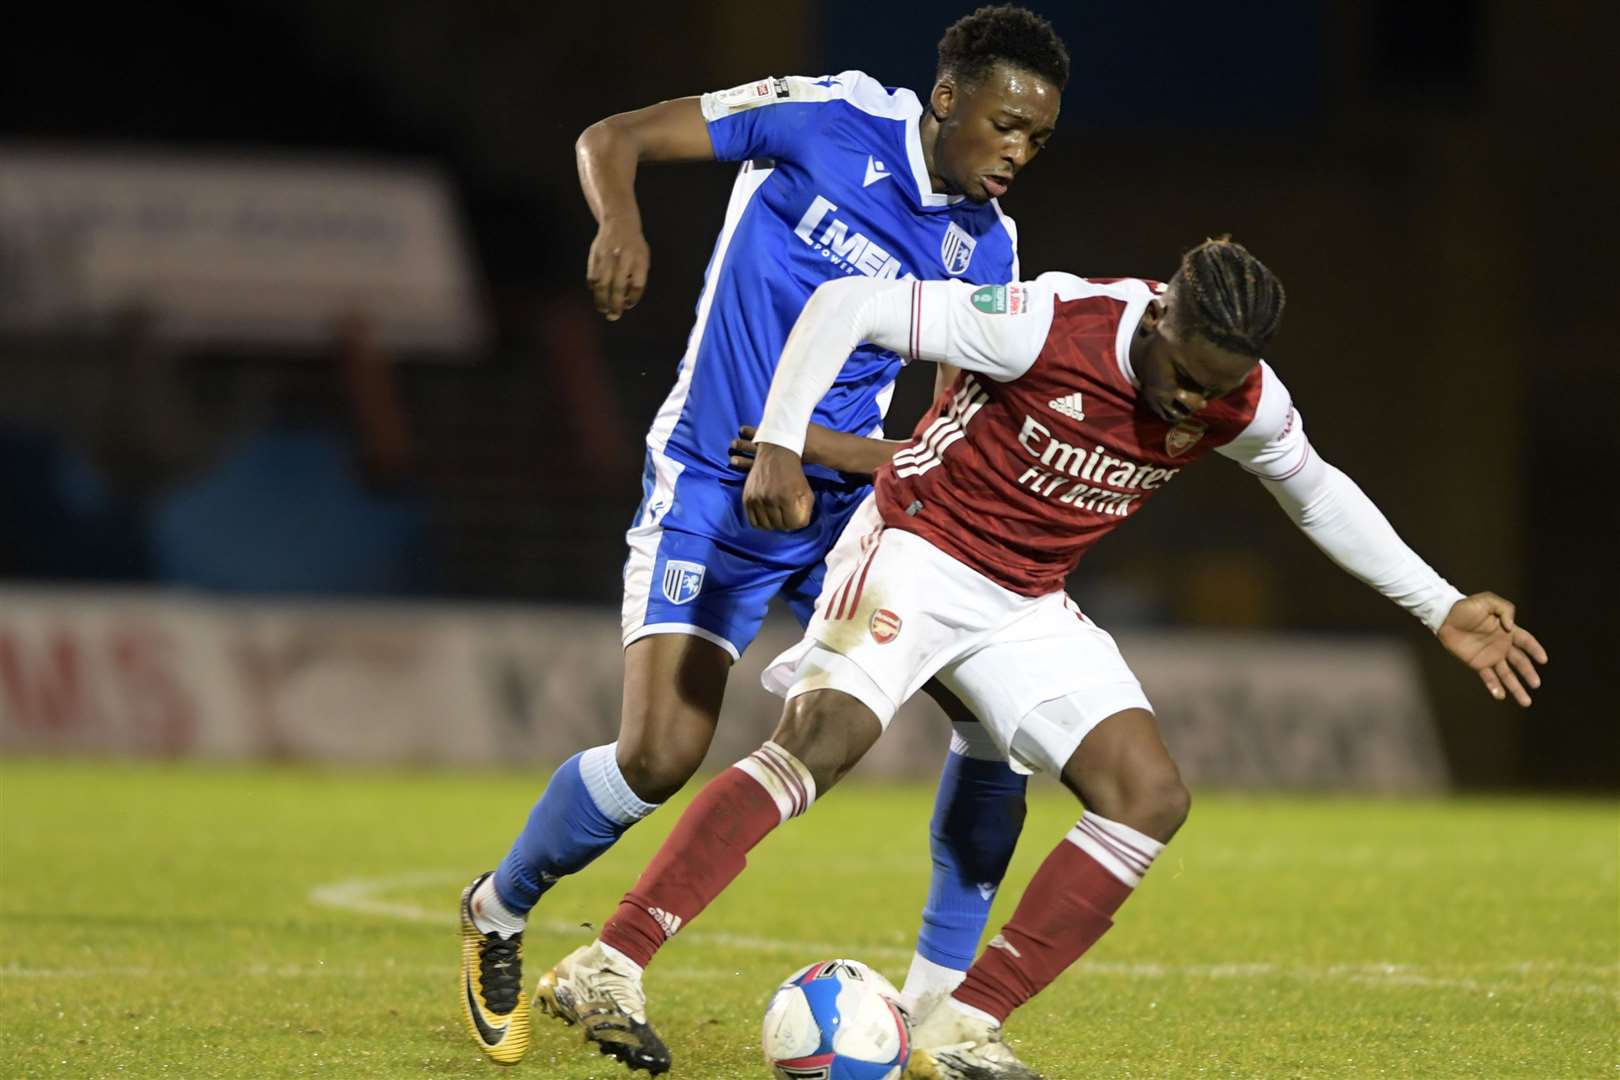 A draw against Arsenal in the group stage was enough to send Gillingham into round two